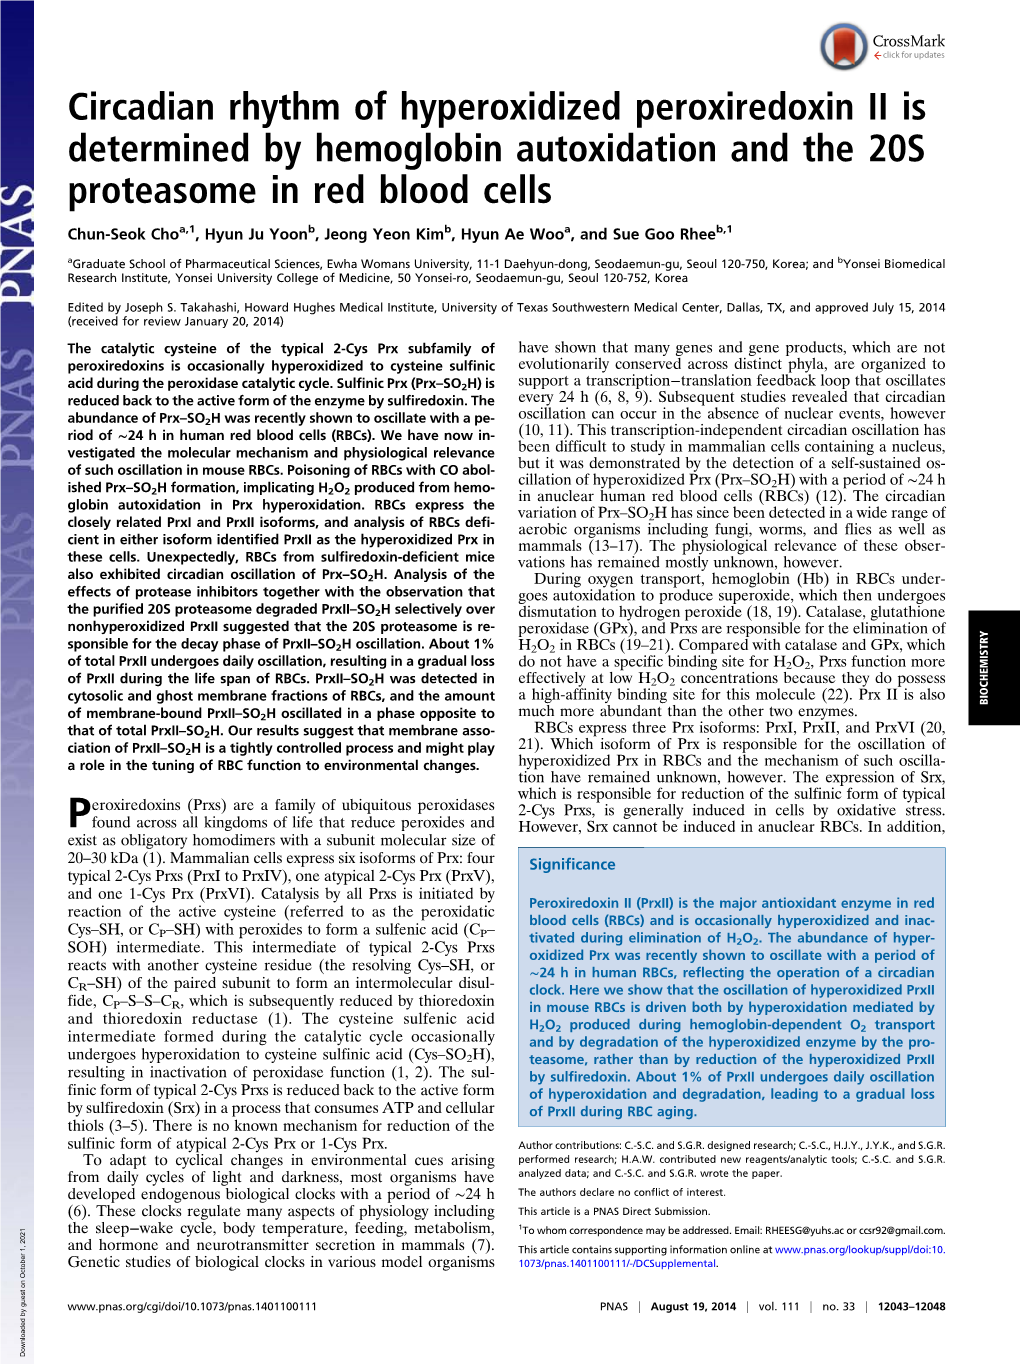 Circadian Rhythm of Hyperoxidized Peroxiredoxin II Is Determined by Hemoglobin Autoxidation and the 20S Proteasome in Red Blood Cells